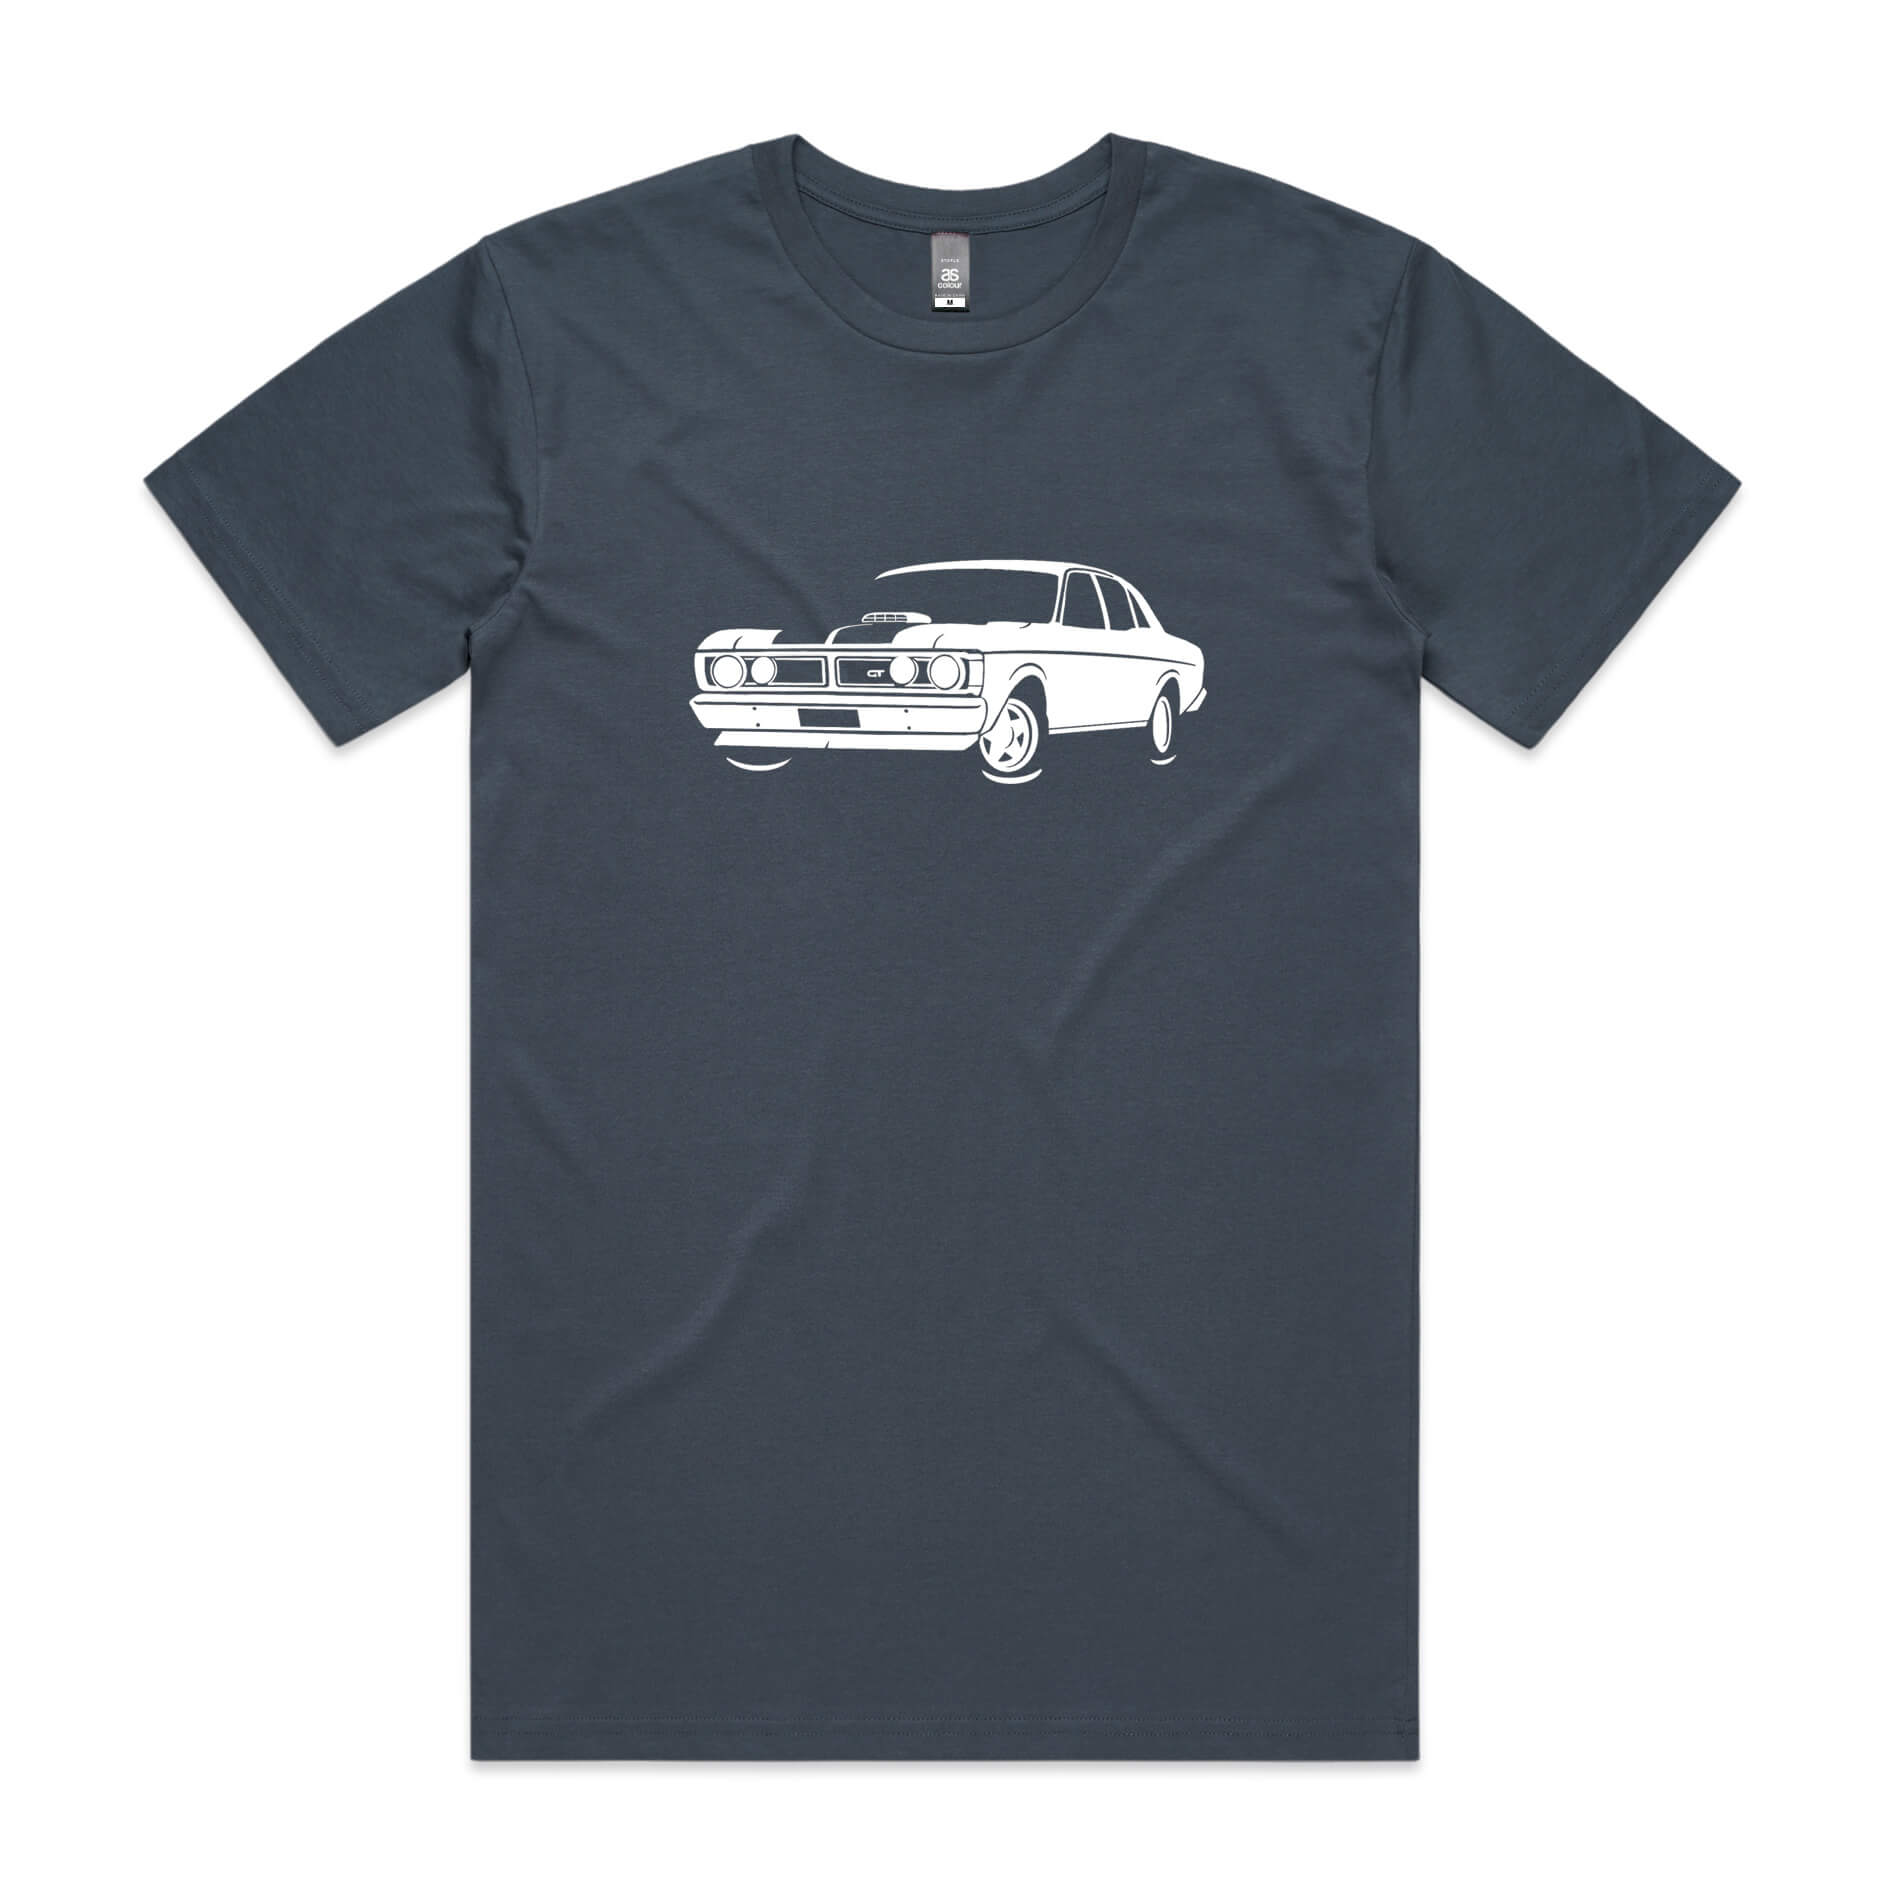 Ford XY Falcon t-shirt in Petrol with white car graphic